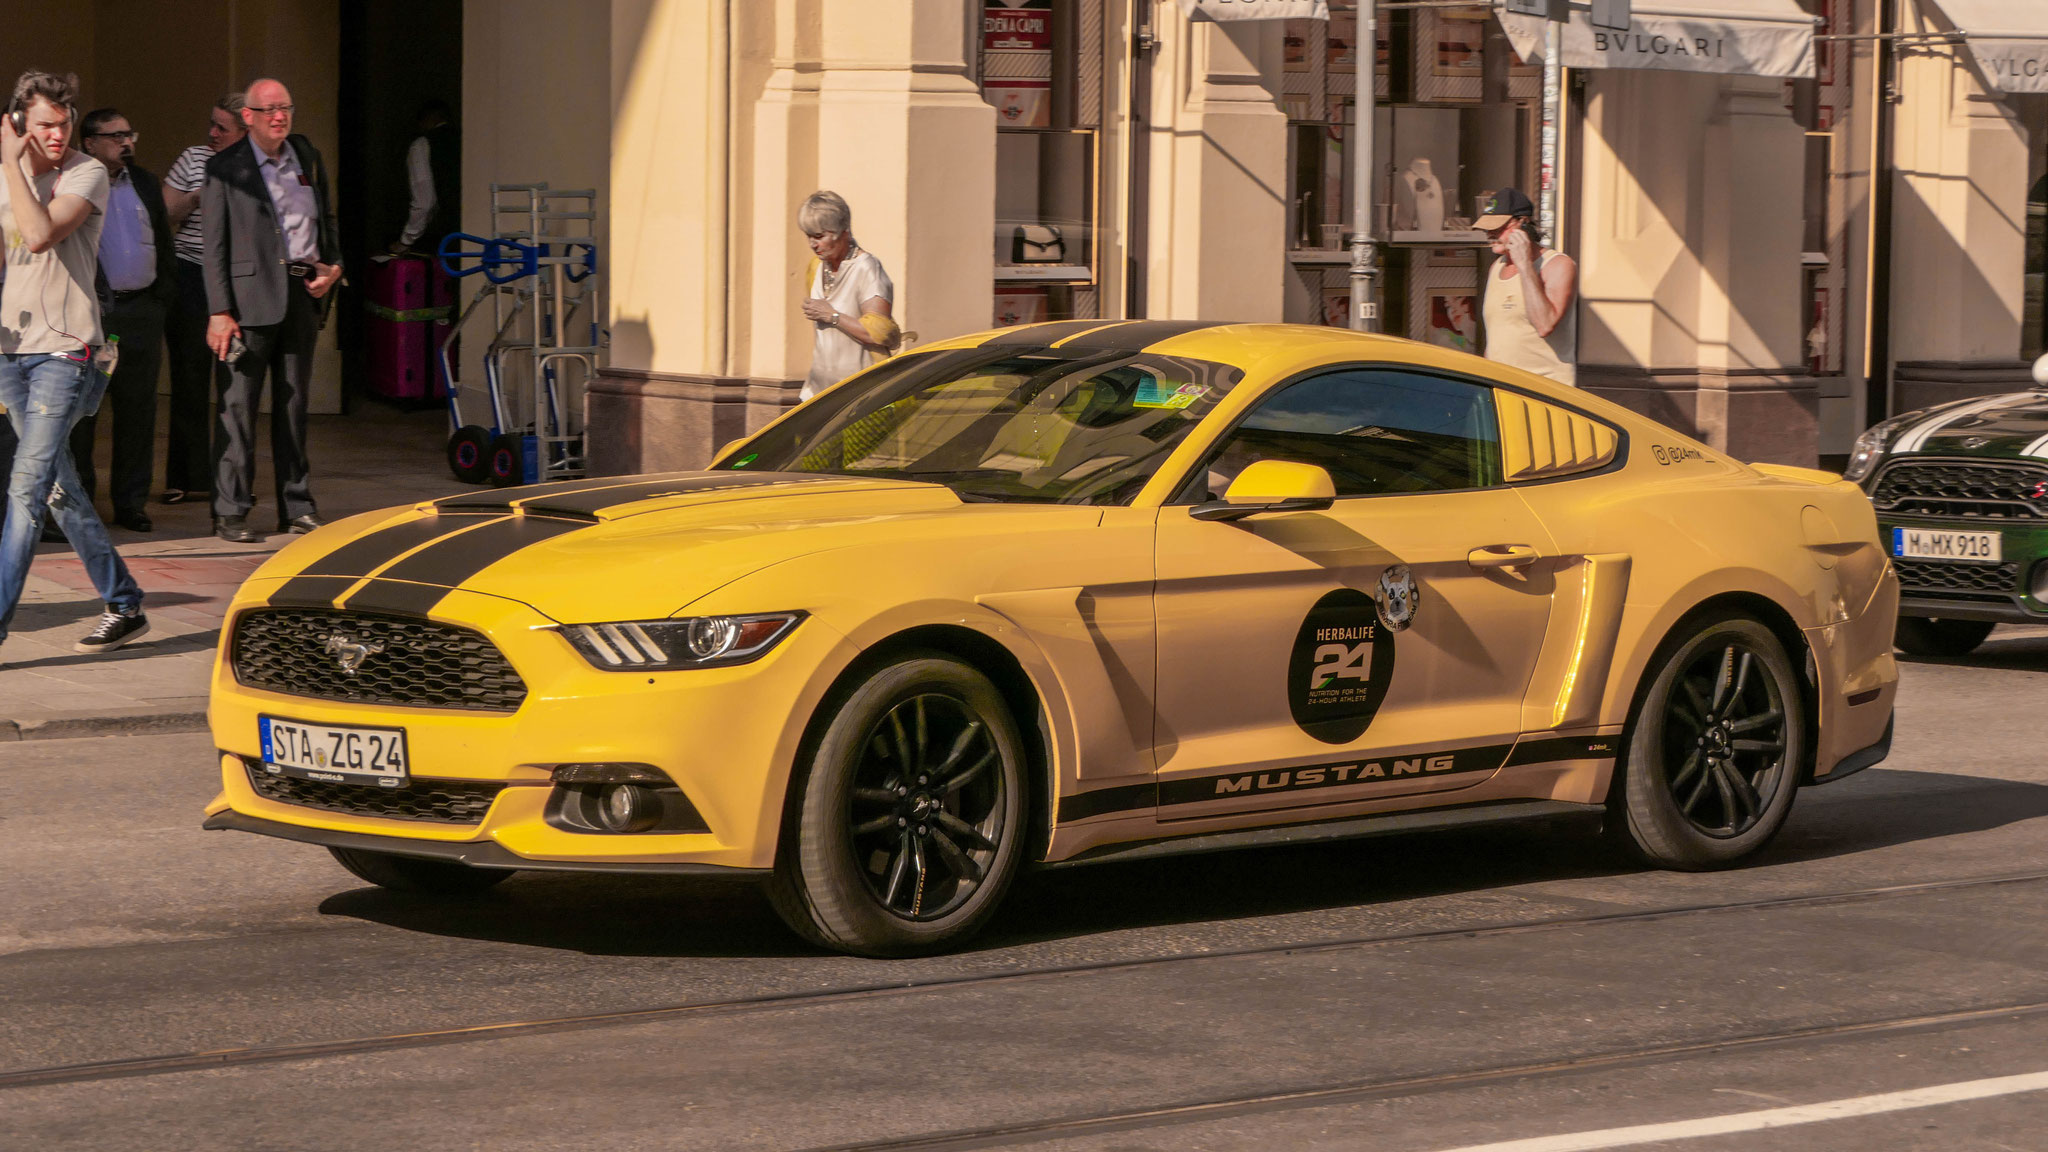 Ford Mustang GT - STA-ZG24